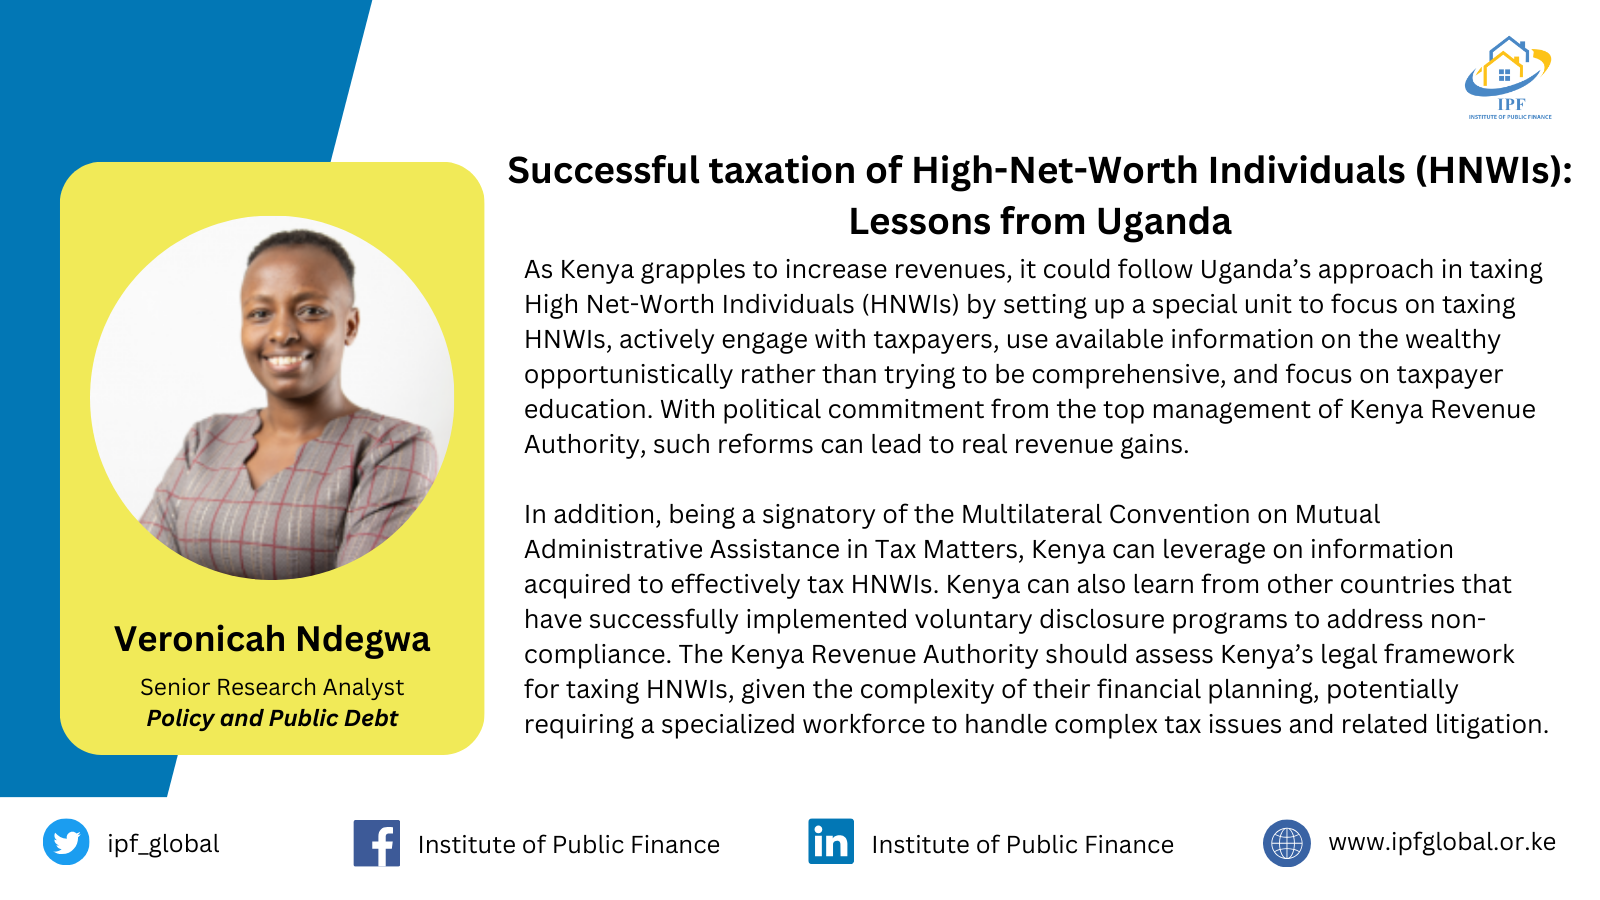 Successful taxation of High-Net-Worth Individuals (HNWIs): Lessons from Uganda